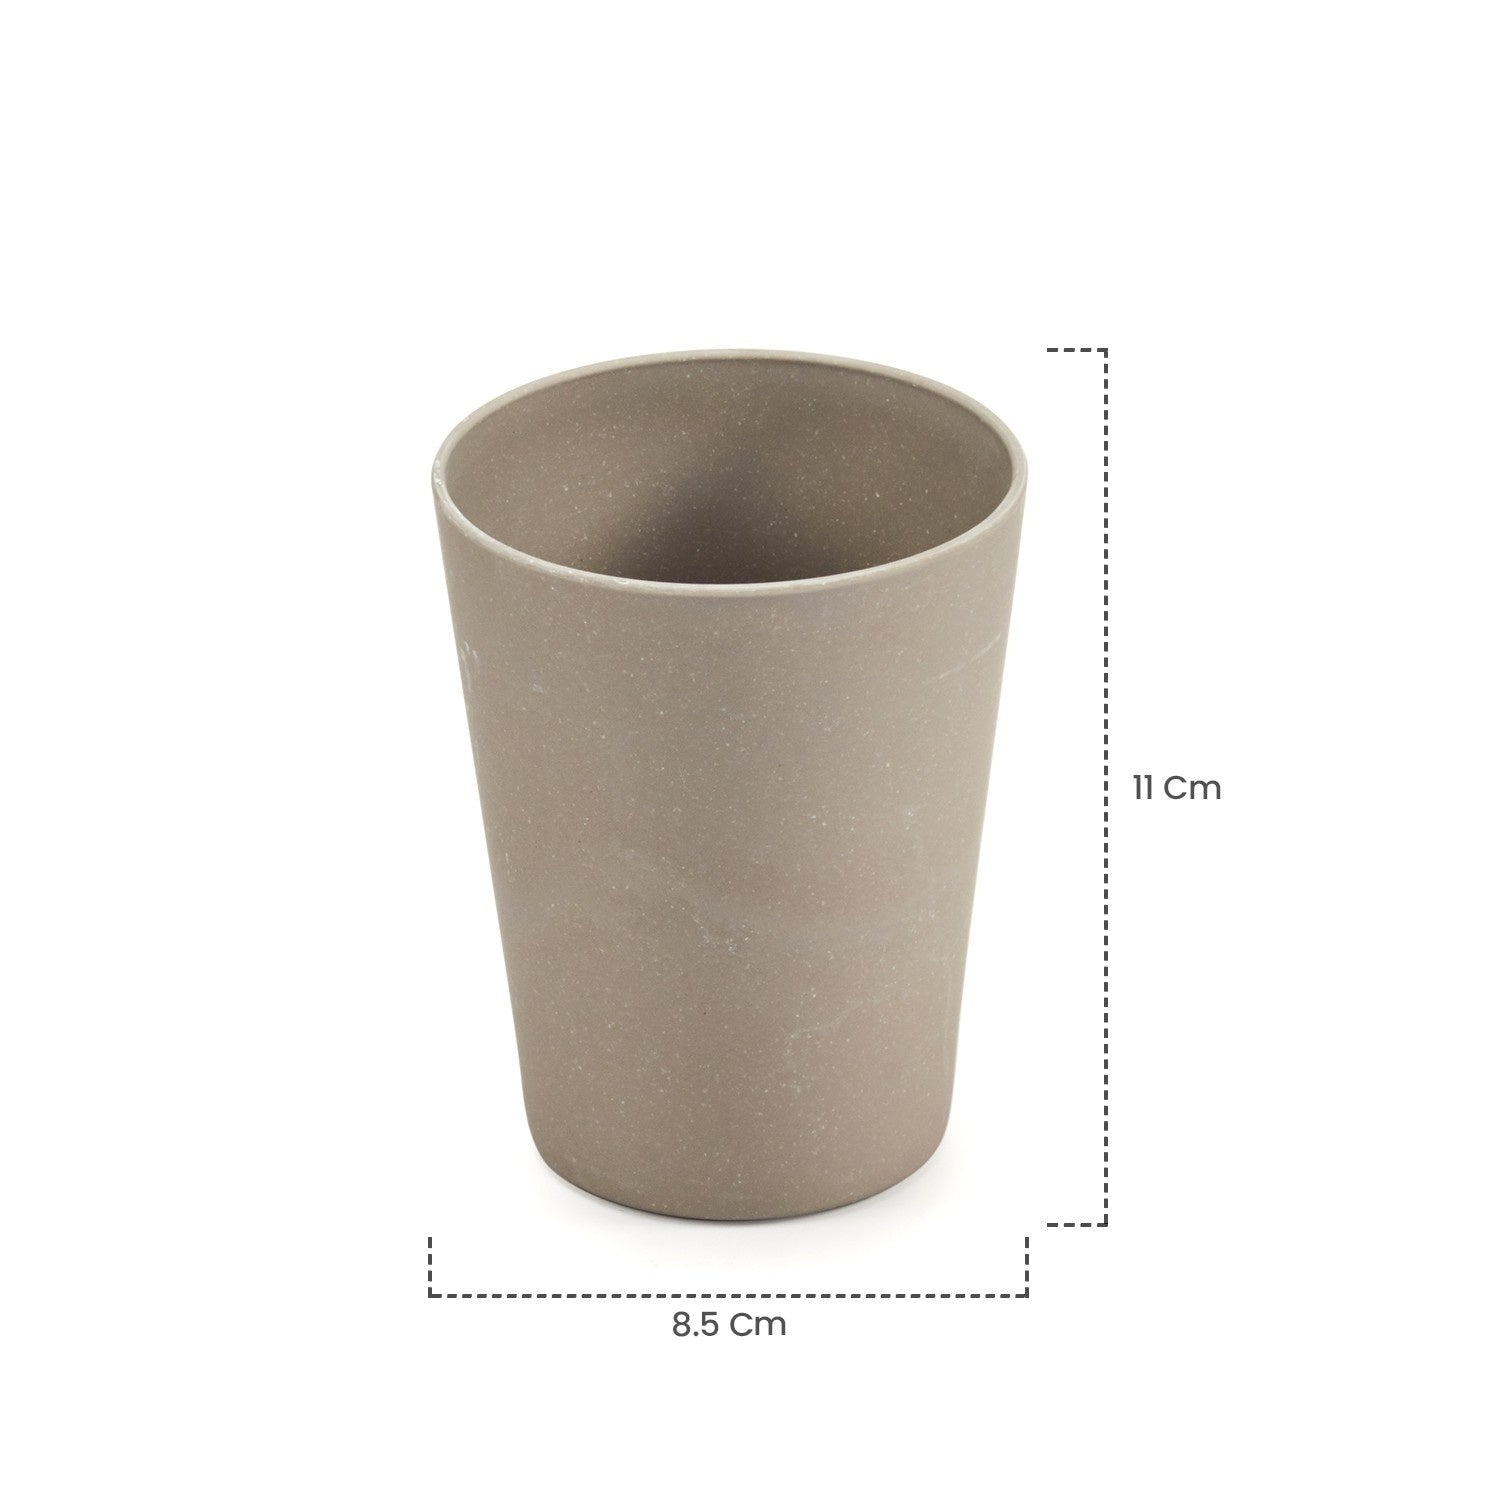 Red Butler Tumblers Bamboo Fibre Tumblers 380ml | 6pcs Set | Cement Design BG38A7 Daily-Use Eco-Friendly Bamboo Fiber Tumbler: Stylish & Sustainable Redbutler